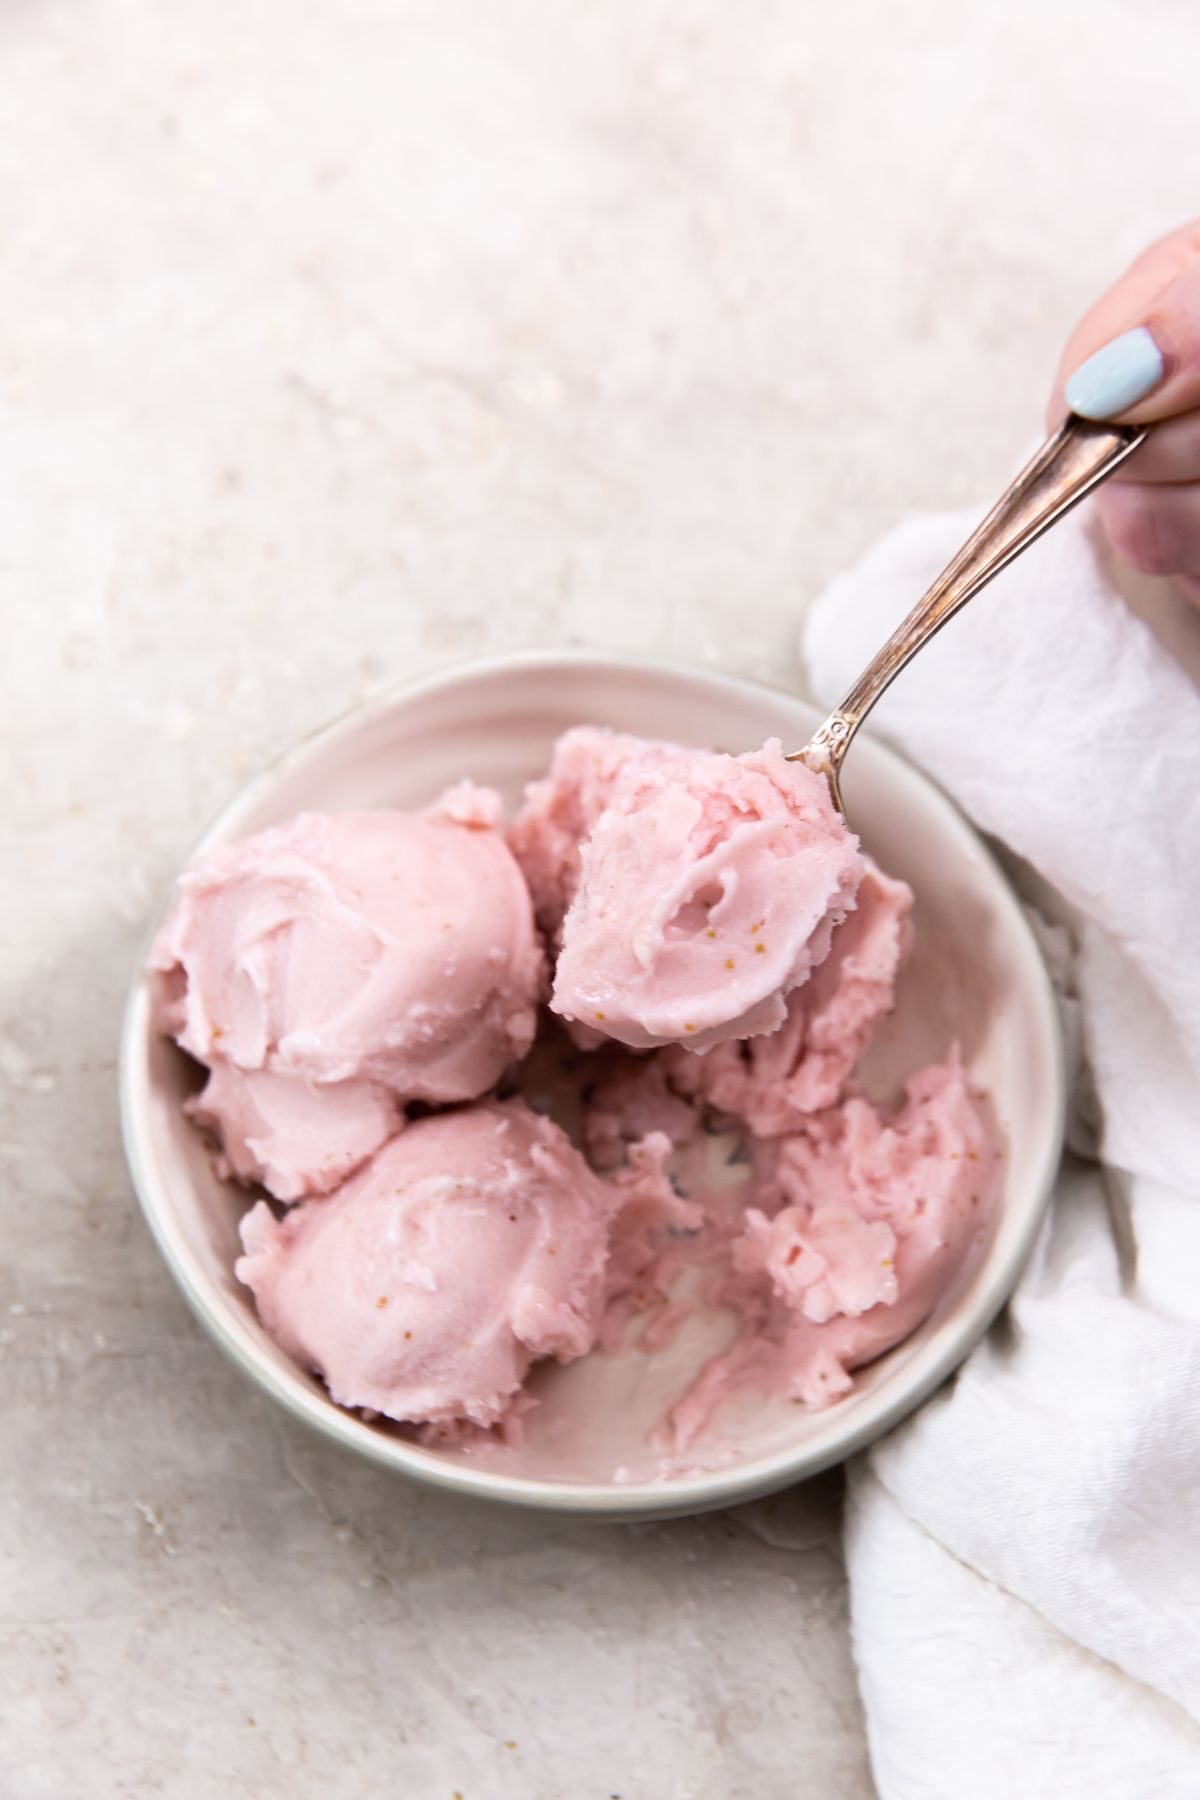 keto strawberry ice cream in a bowl with a hand picking up the spoon